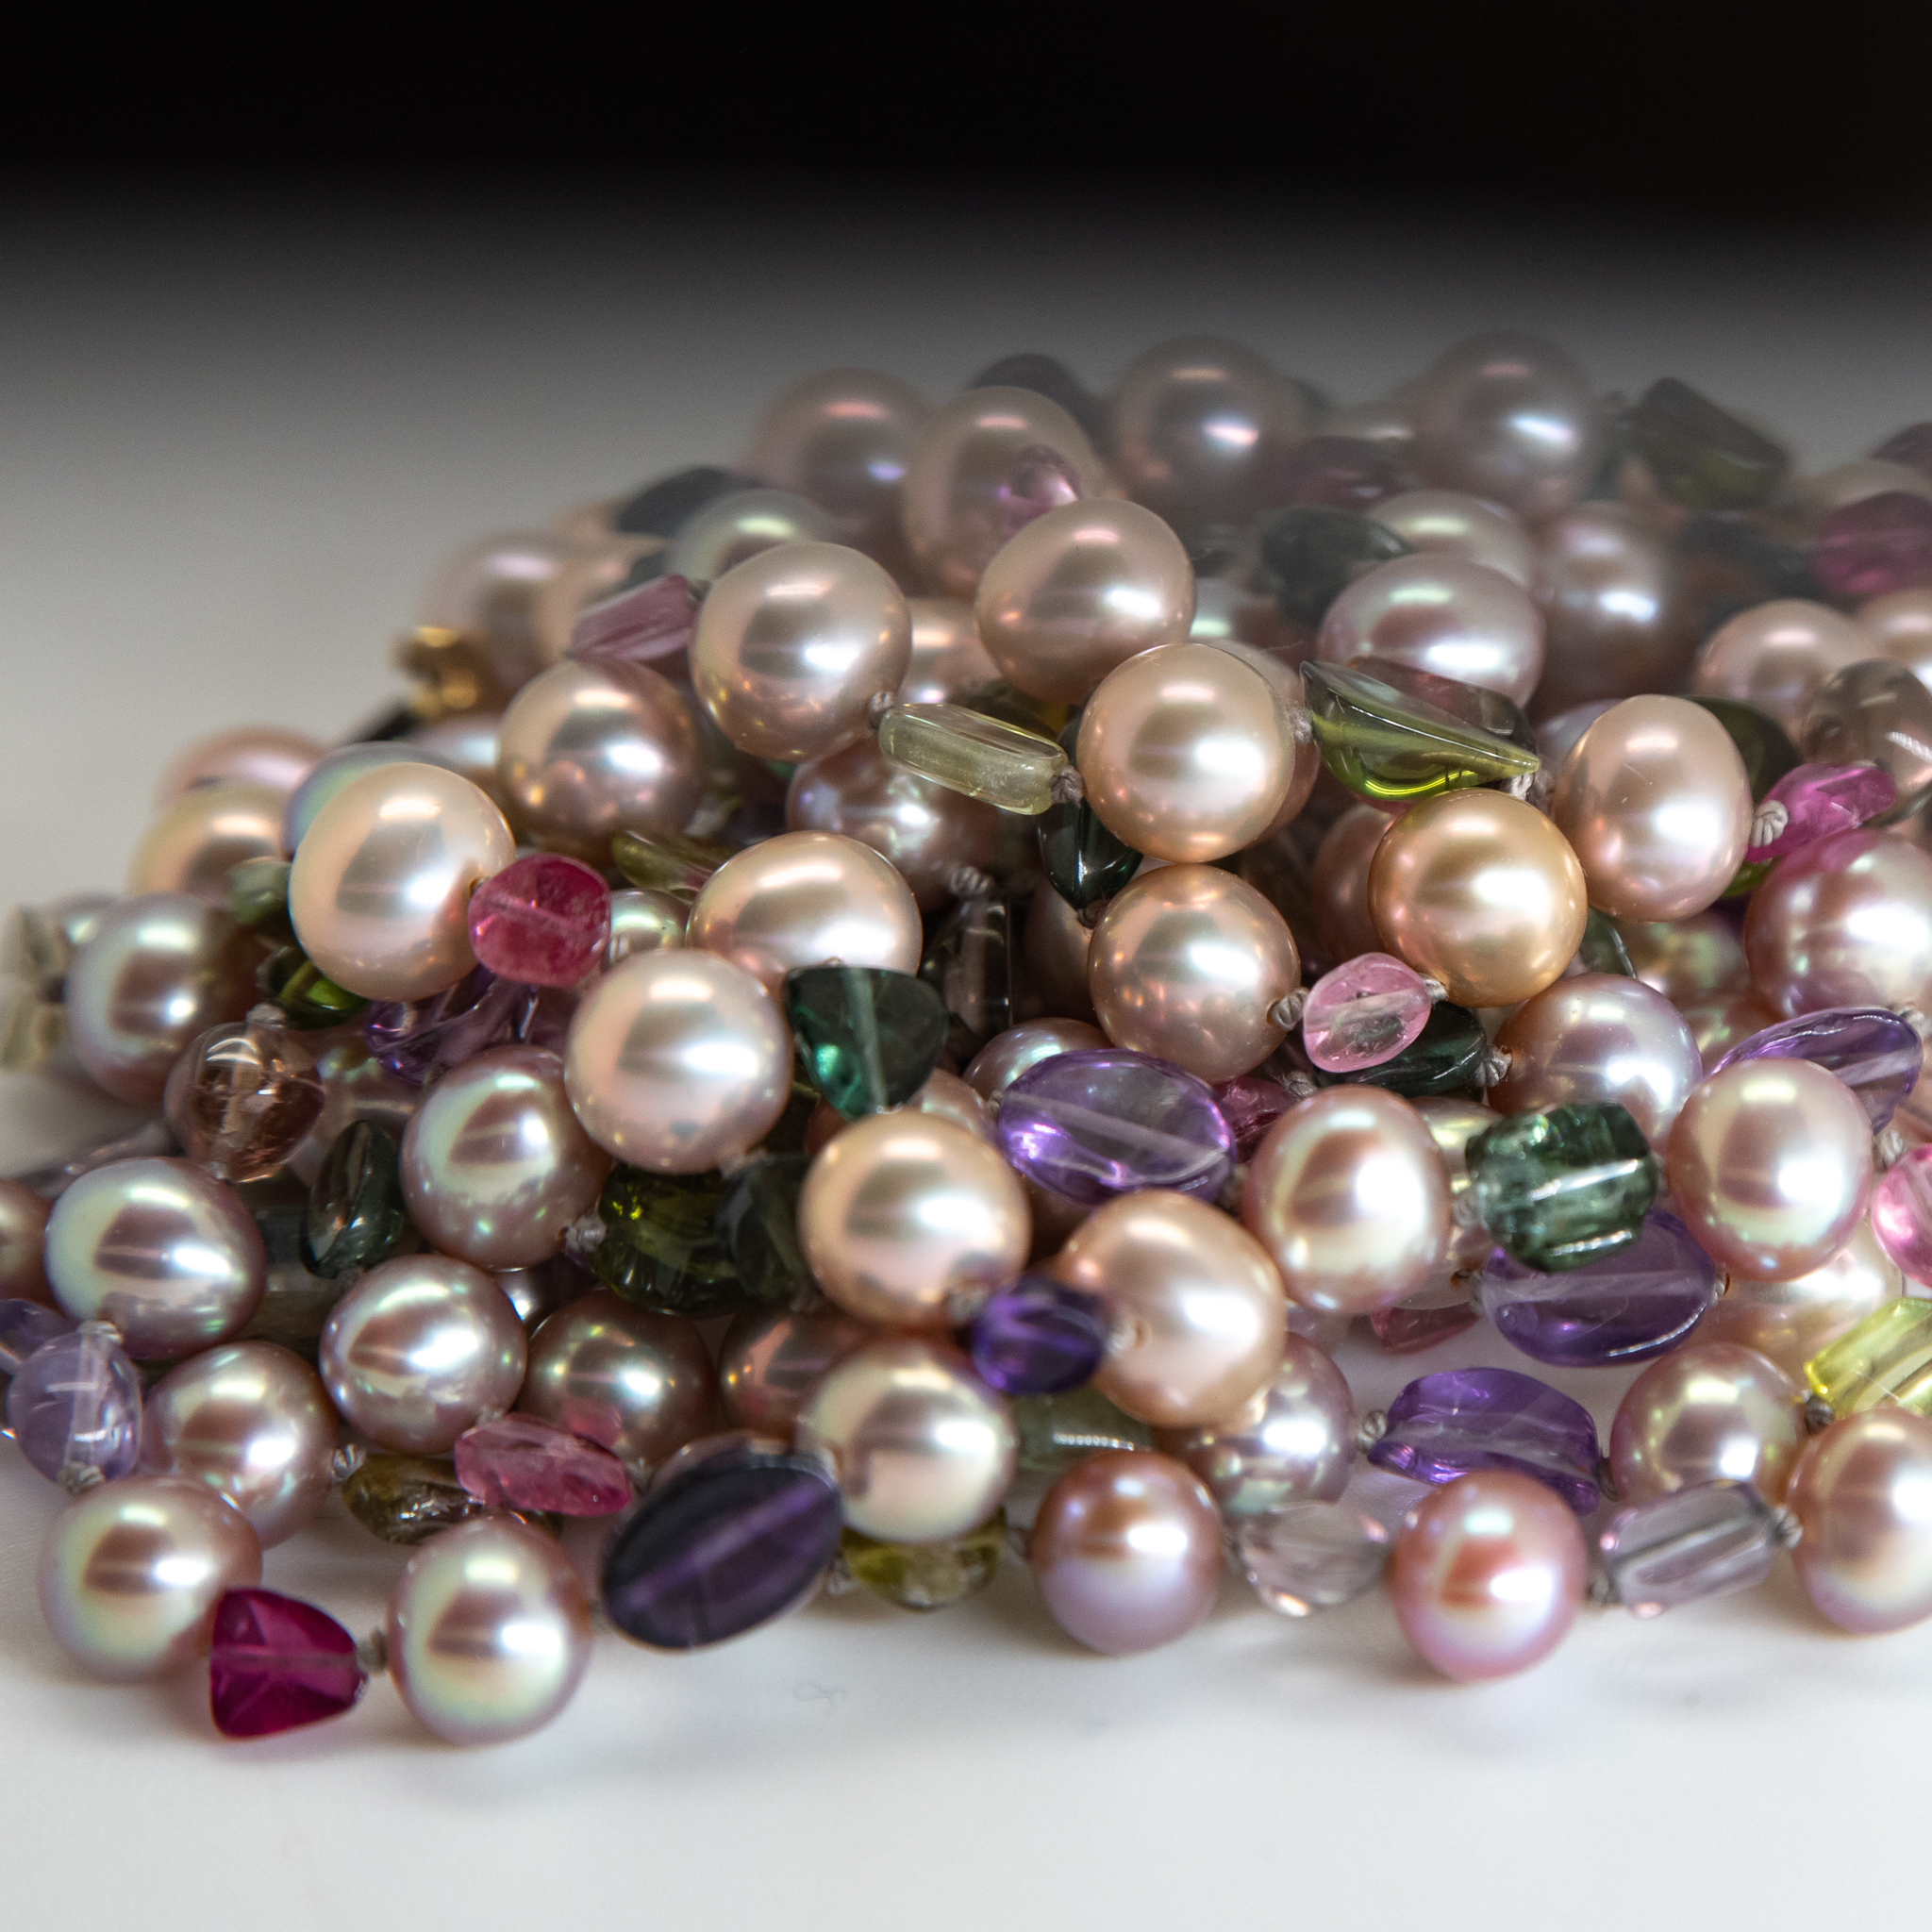 closeup of freshwater pearls and tourmaline cabochons necklace showing hand knotting